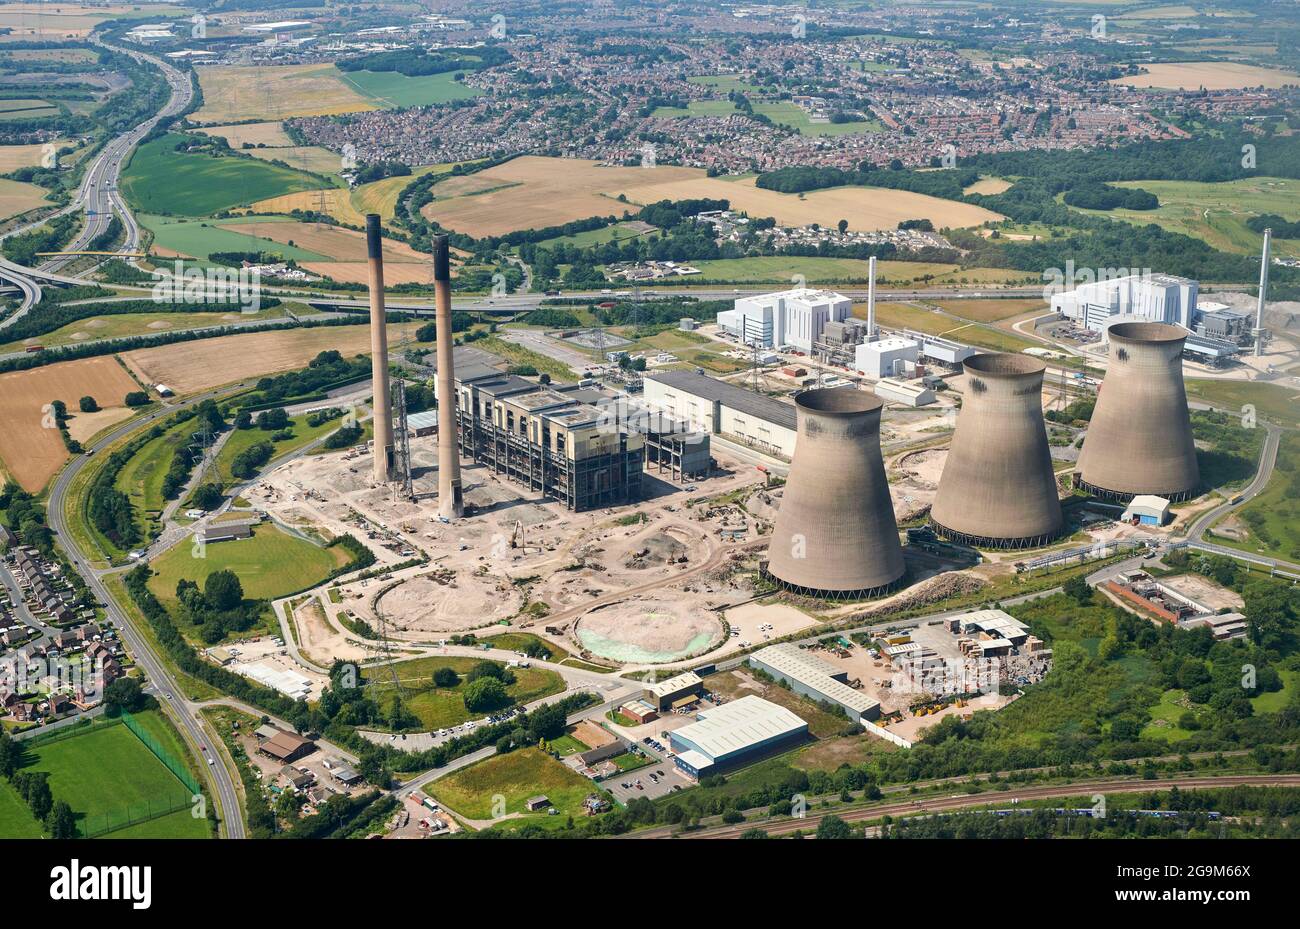 An aerial view of the demolition of the Power station, Ferrybridge, West Yorkshire, northern England, UK, 3 cooling towers gone Stock Photo